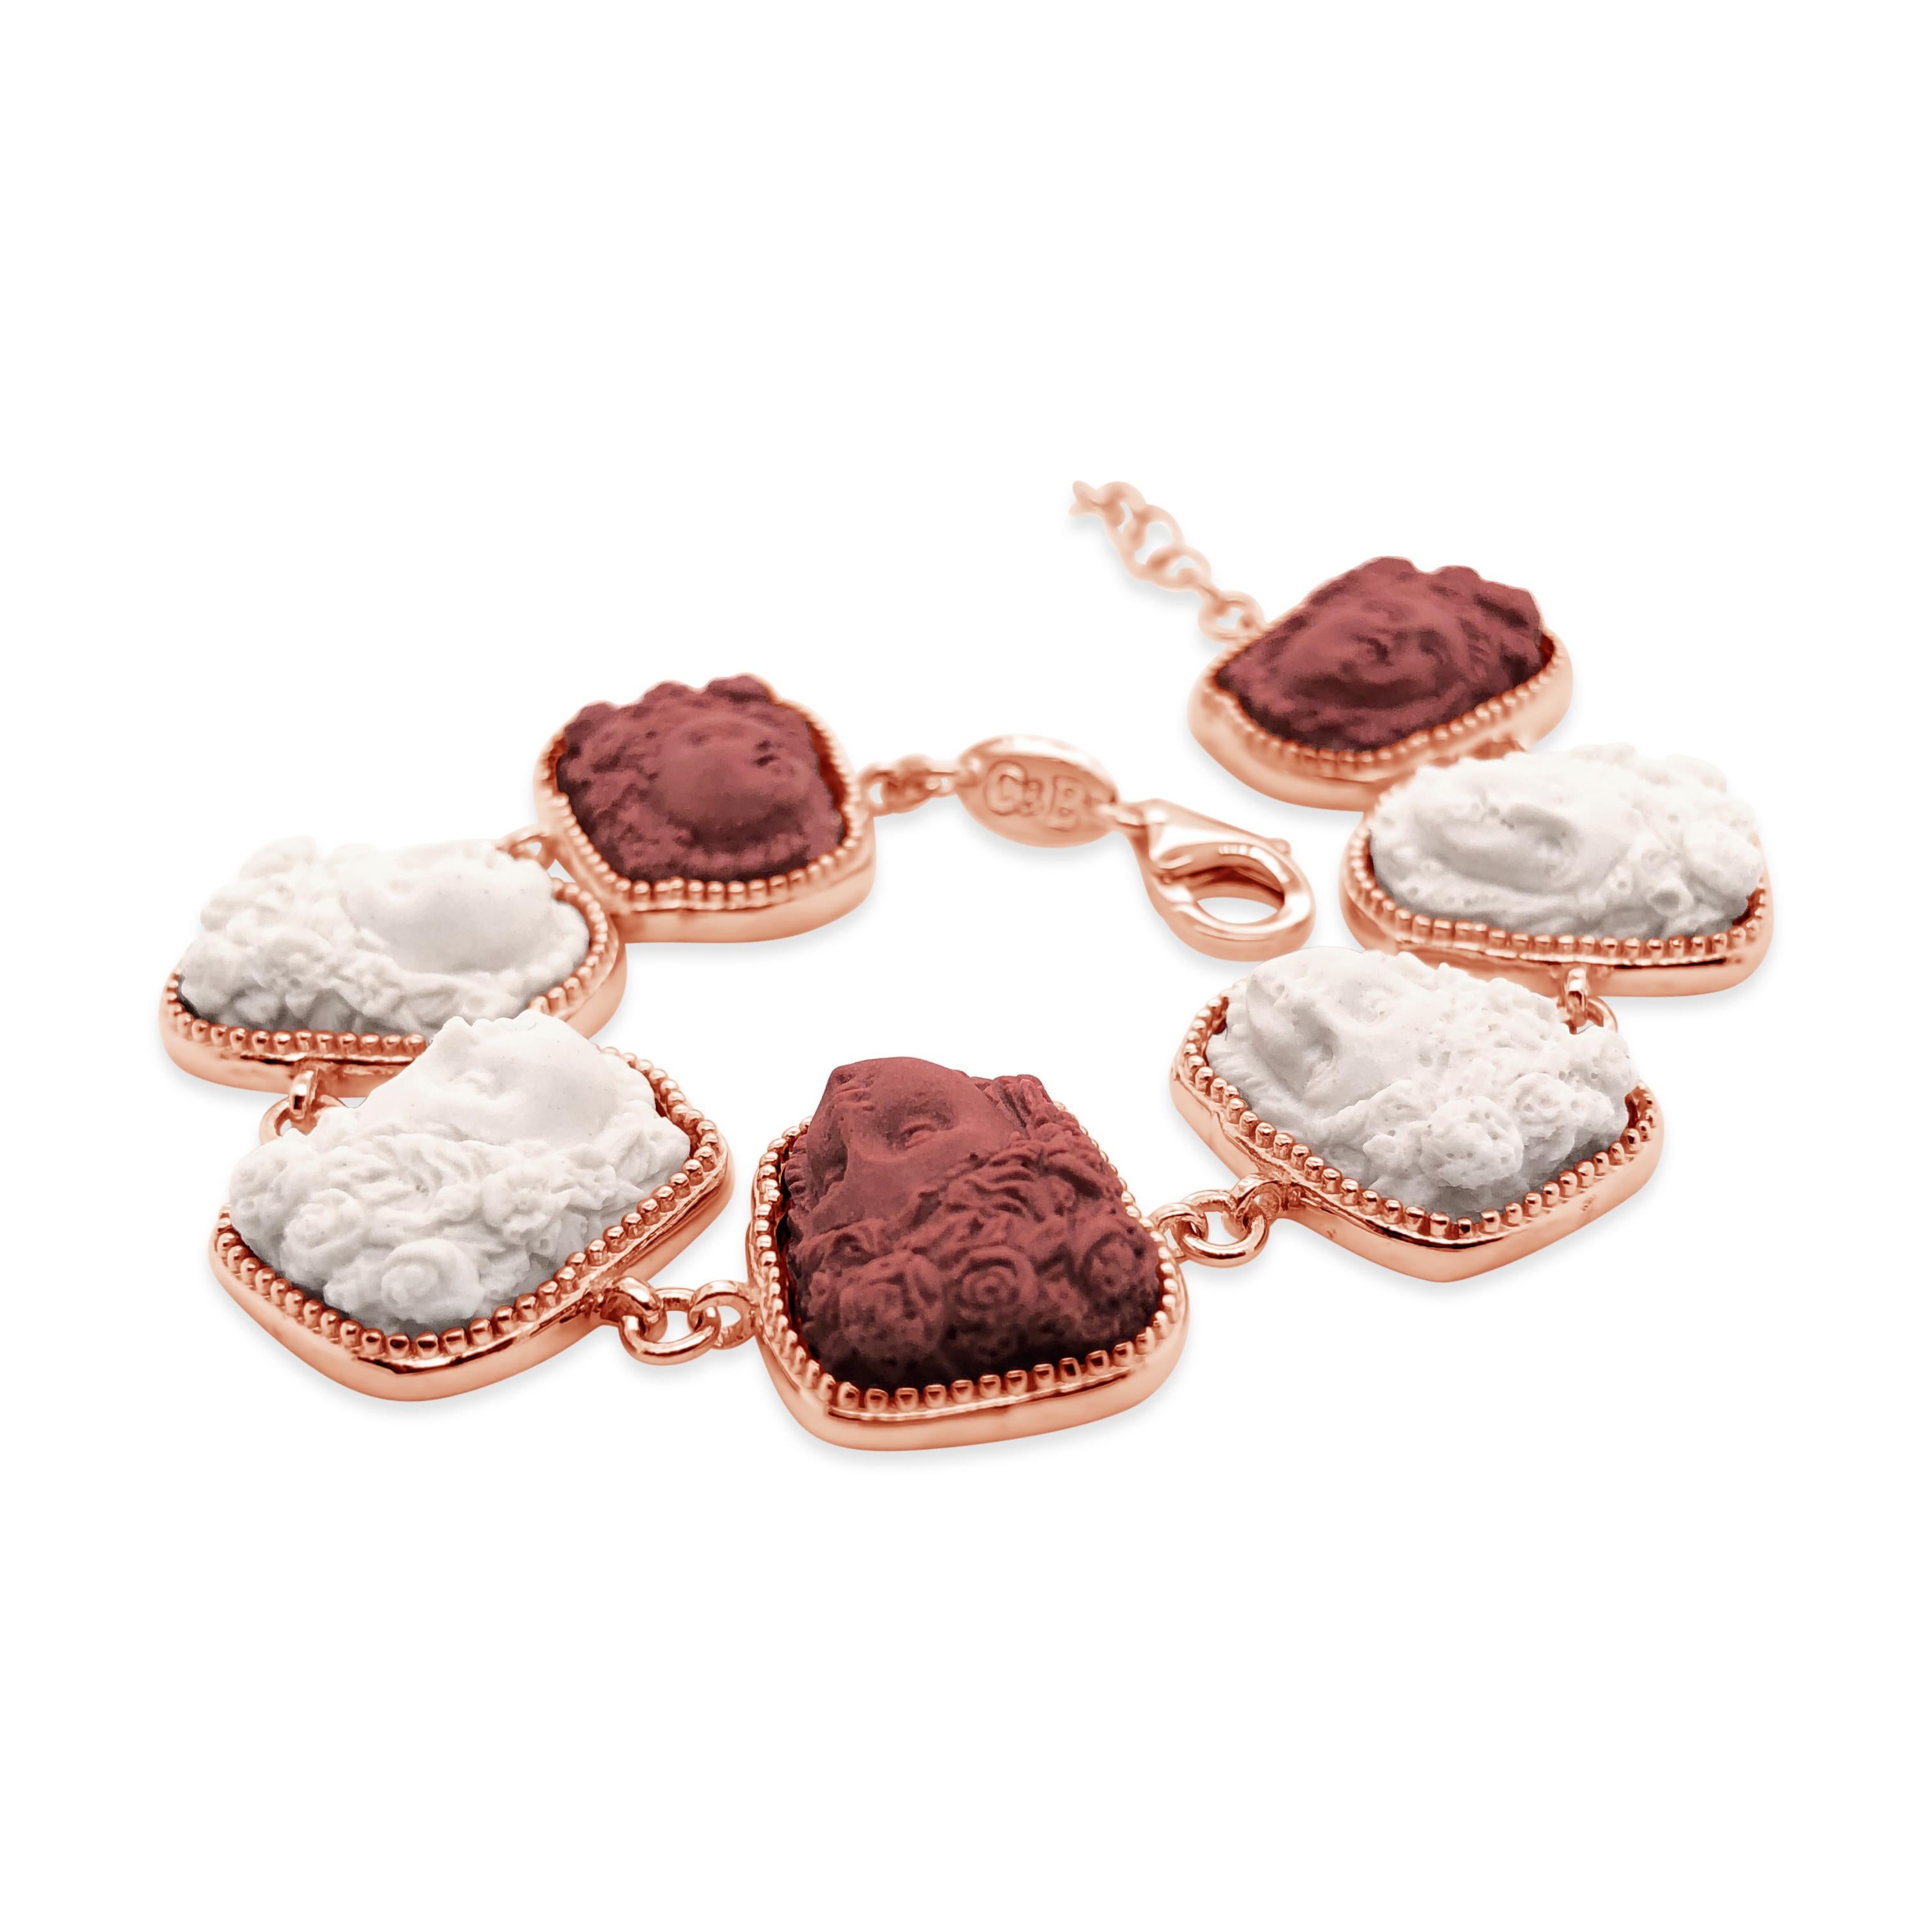 Beautifully hand crafted porcelain cameo bracelet depicting the portrait of a woman wearing a fruit ornament. This beautifully detailed selection of cameos, mounted in 18k rose gold vermeil is a beautiful work of art. In times past, cameos were